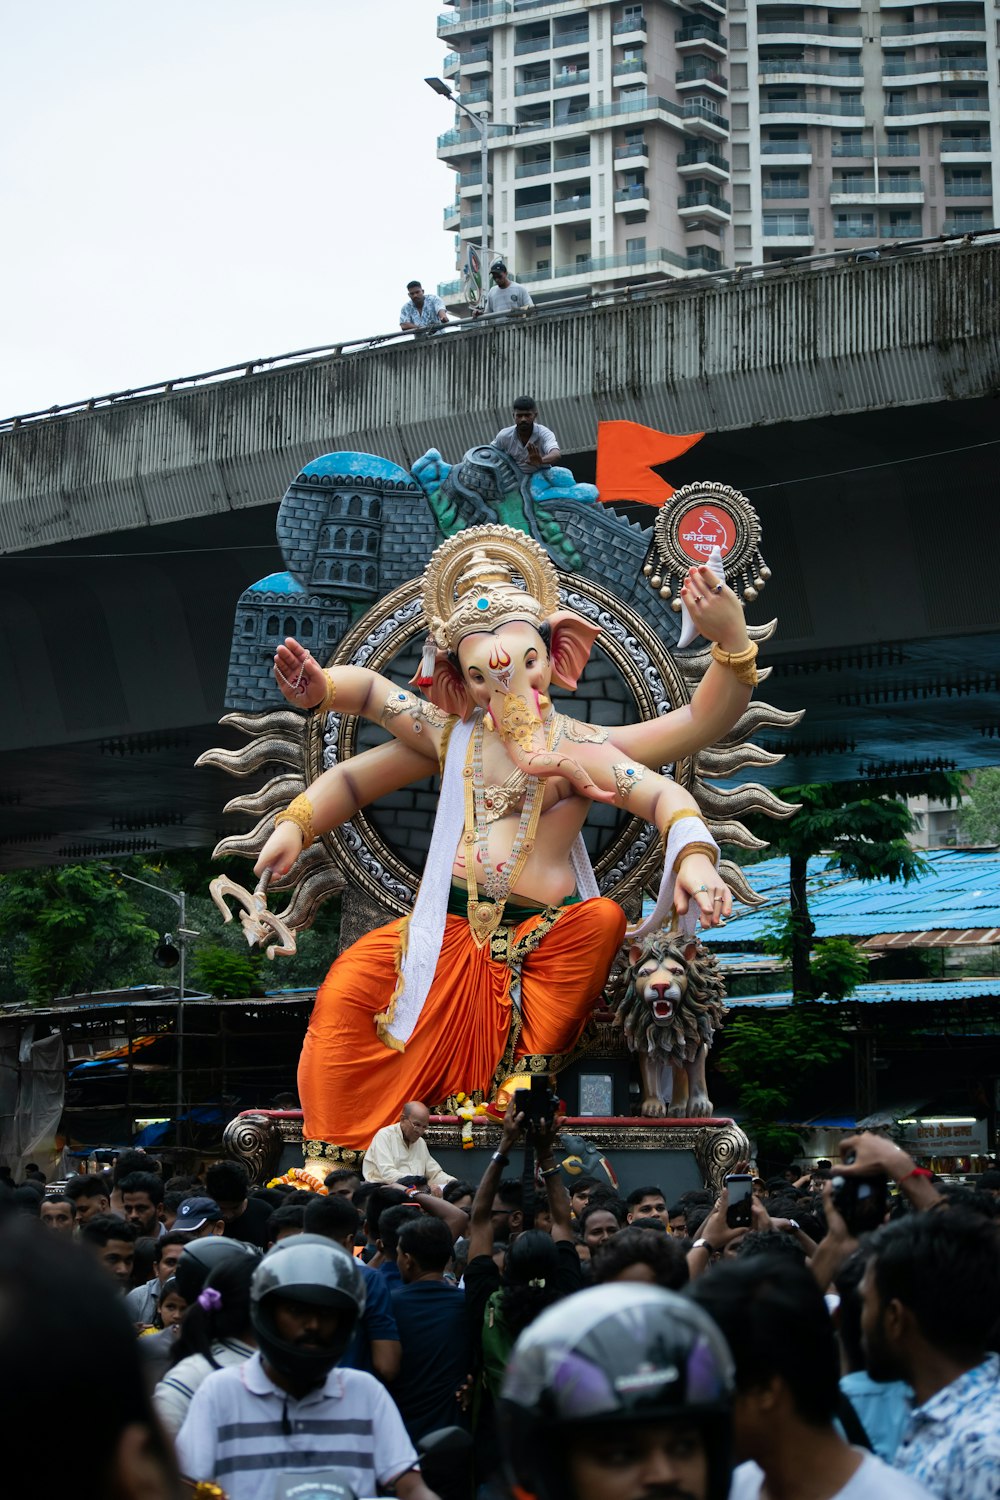 a large statue of a hindu god in the middle of a crowd